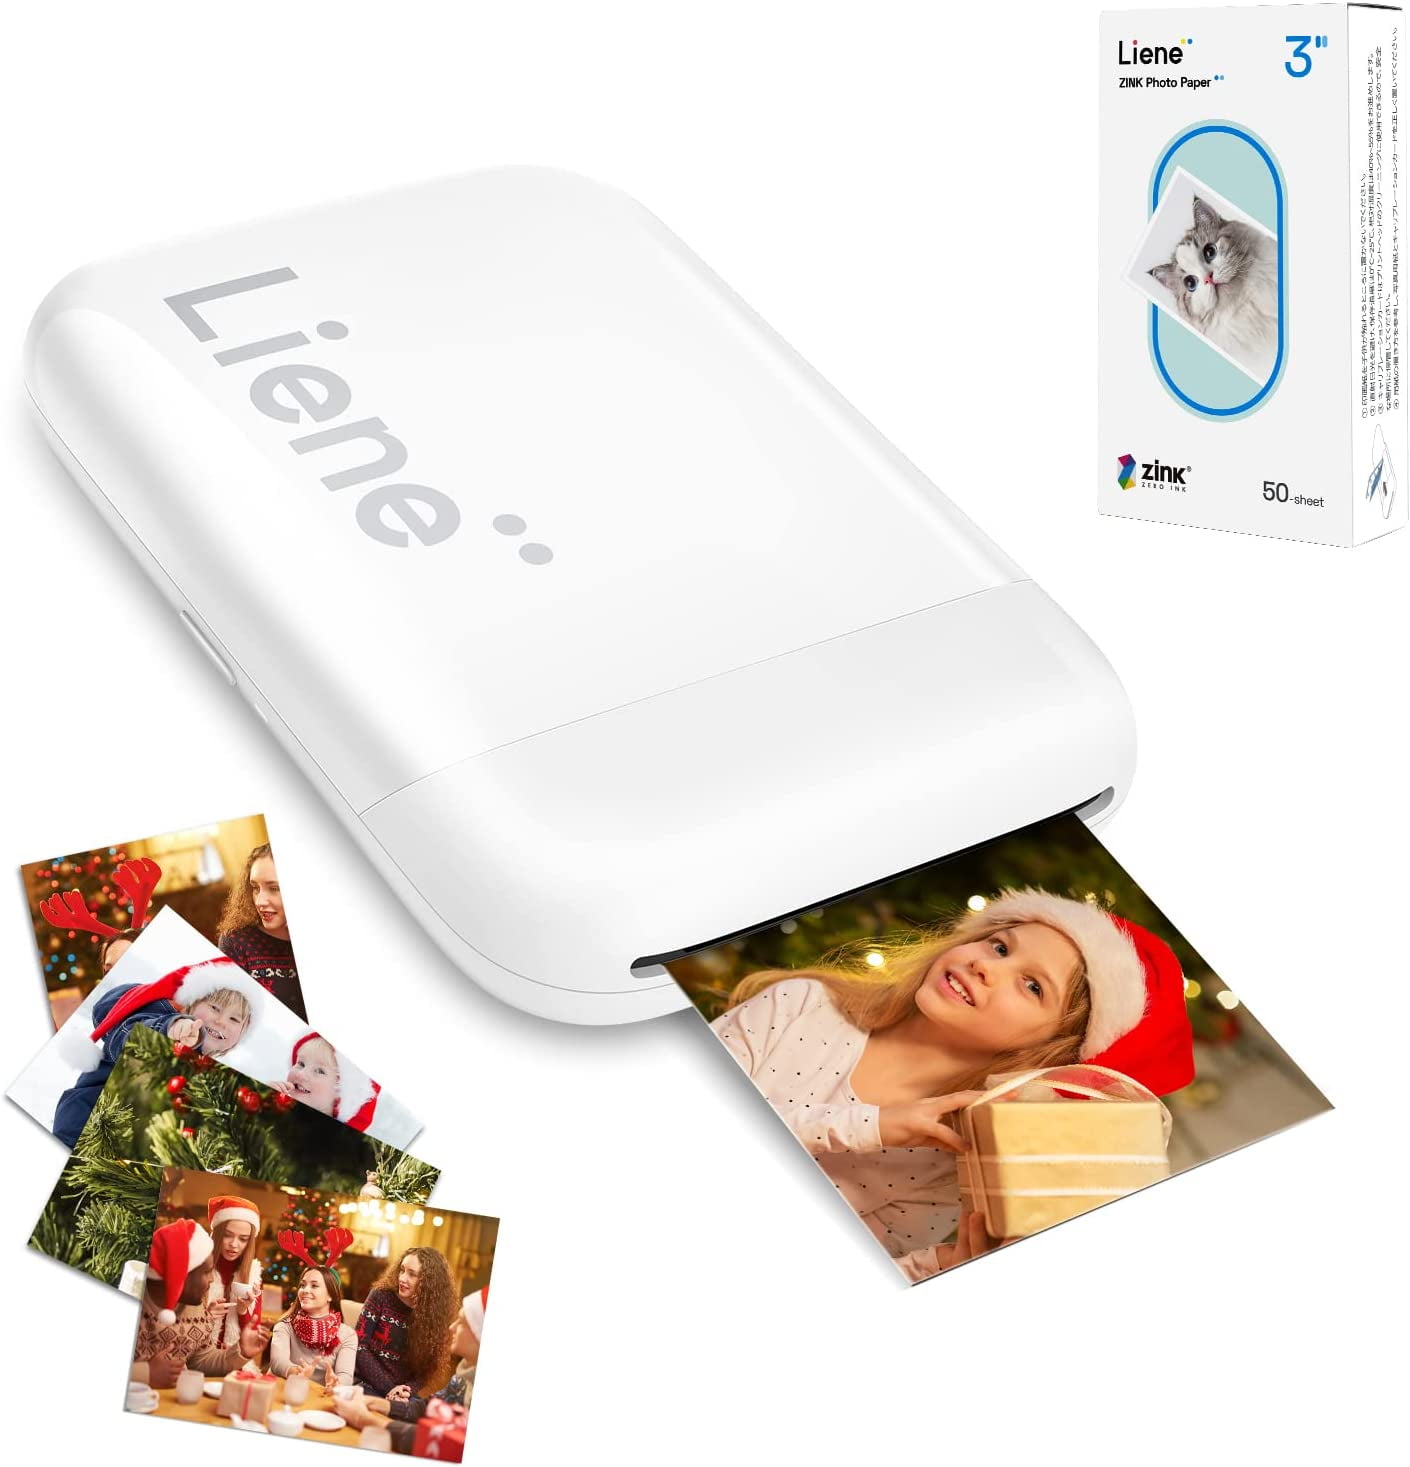 Svaghed indlogering status Liene 2x3\u201D Photo Printer Mini Portable Photo Printer Bundle w/ 50 Zink  Adhesive Paper Bluetooth 5.0 Compatible w/iOS &amp; Small Picture Printer  for iPhone Smartphone White - Walmart.com